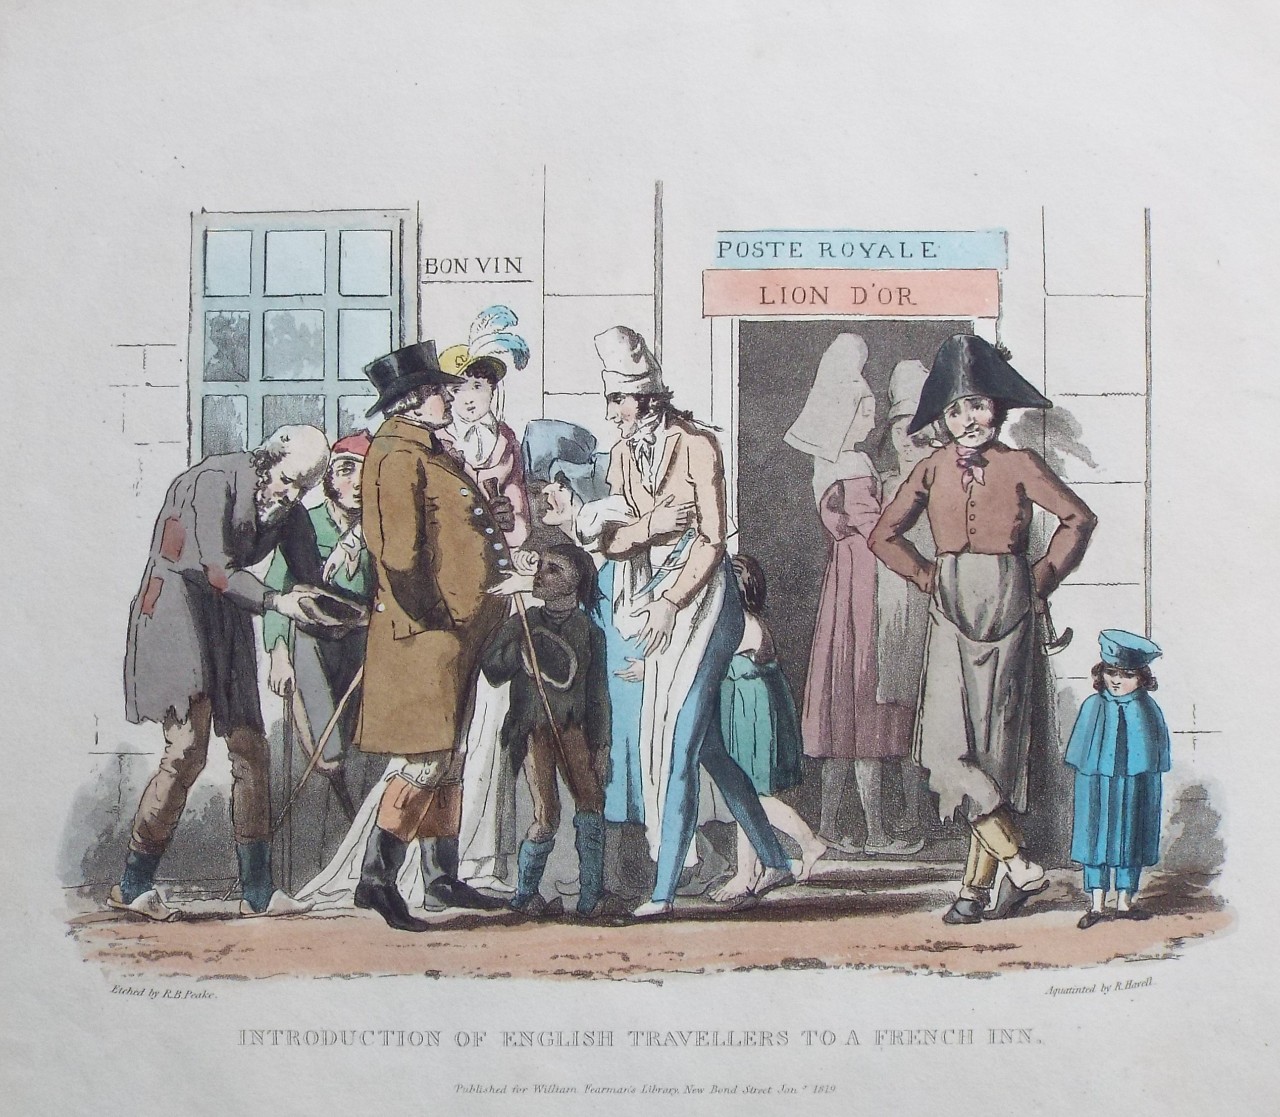 Aquatint - Introduction of English Travellers to a French Inn. - Havell